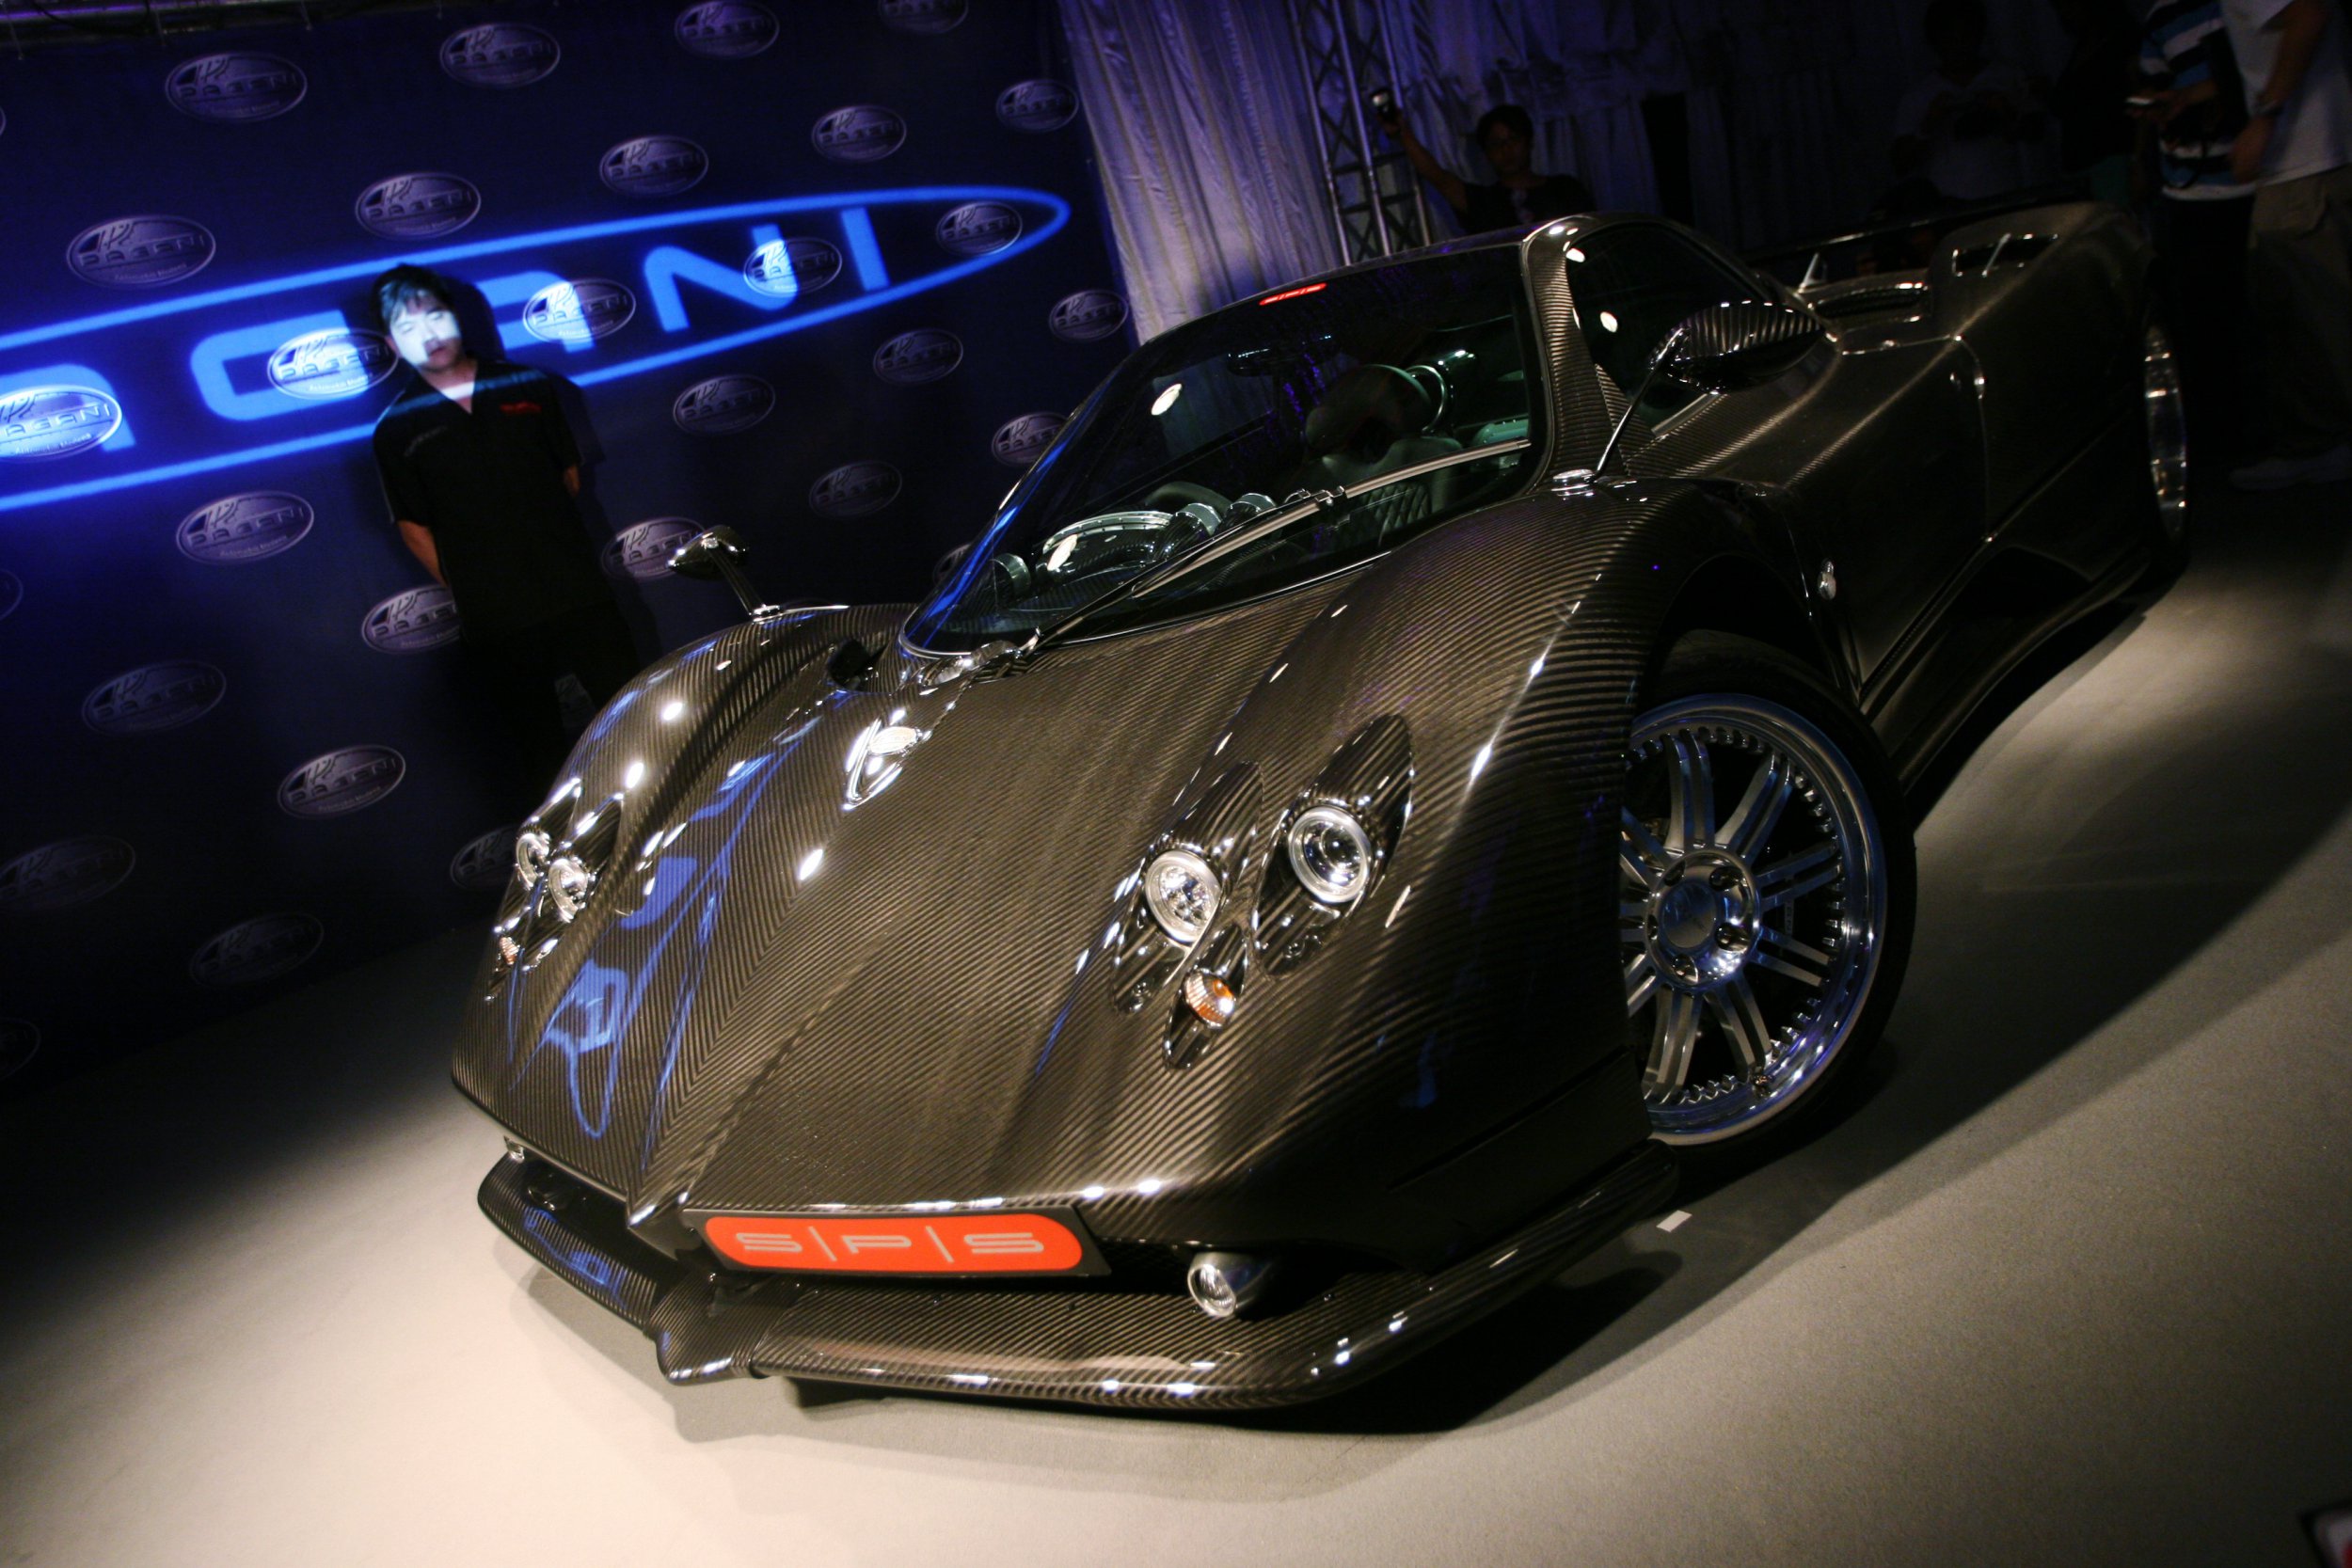 The supercar has a sleek and unique design, and ranks as one of the couple's most valuable cars in the collection